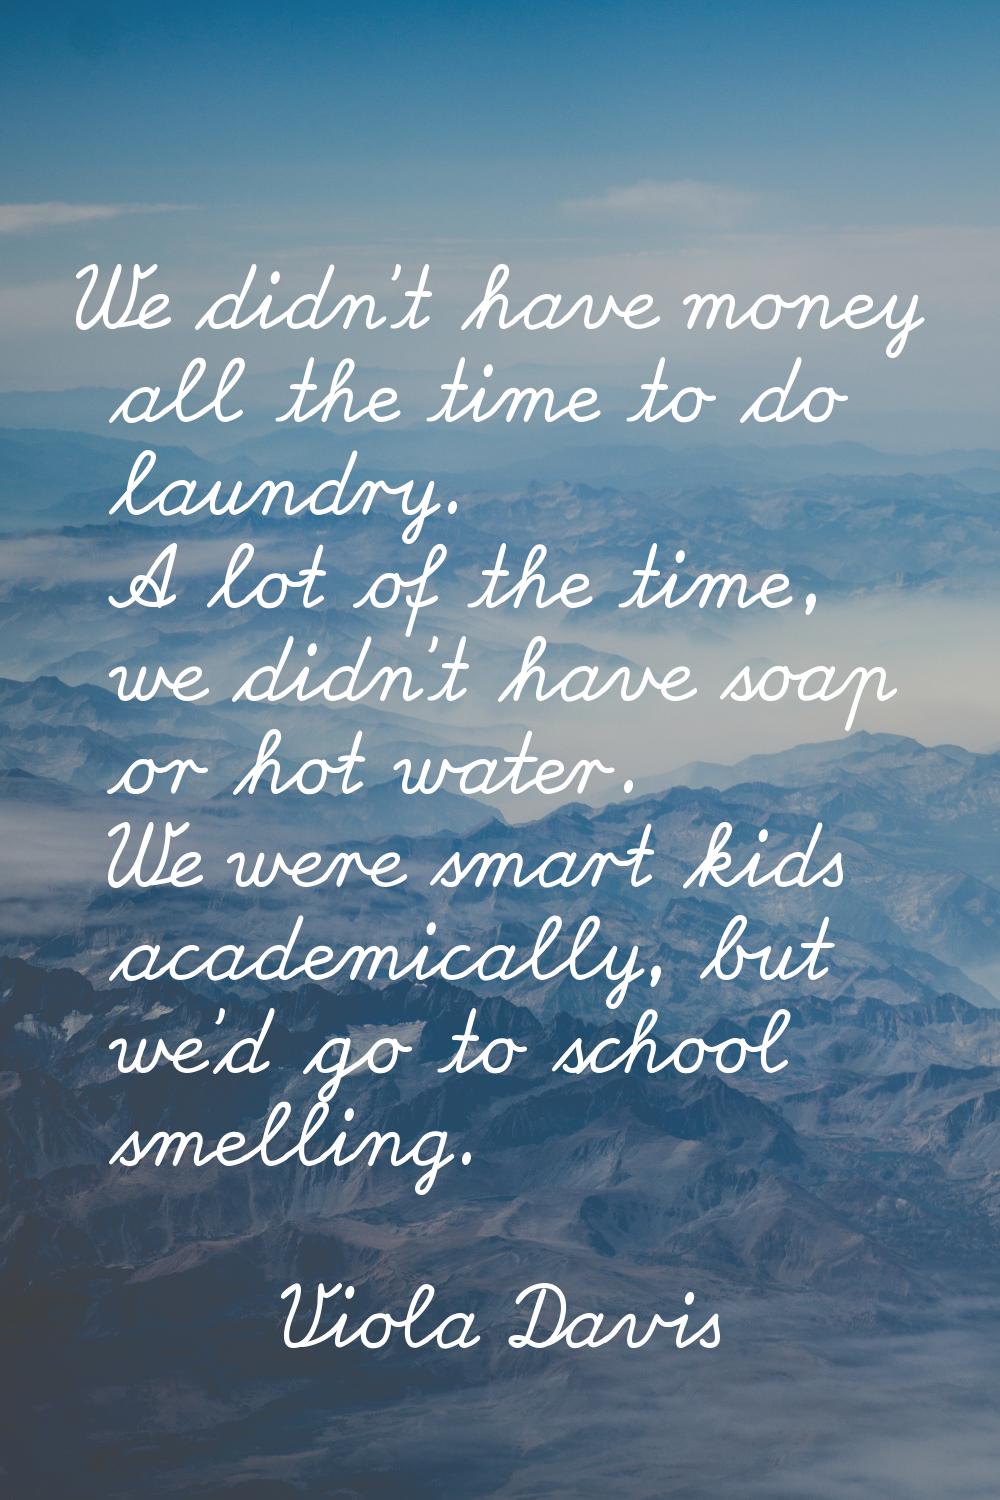 We didn't have money all the time to do laundry. A lot of the time, we didn't have soap or hot wate